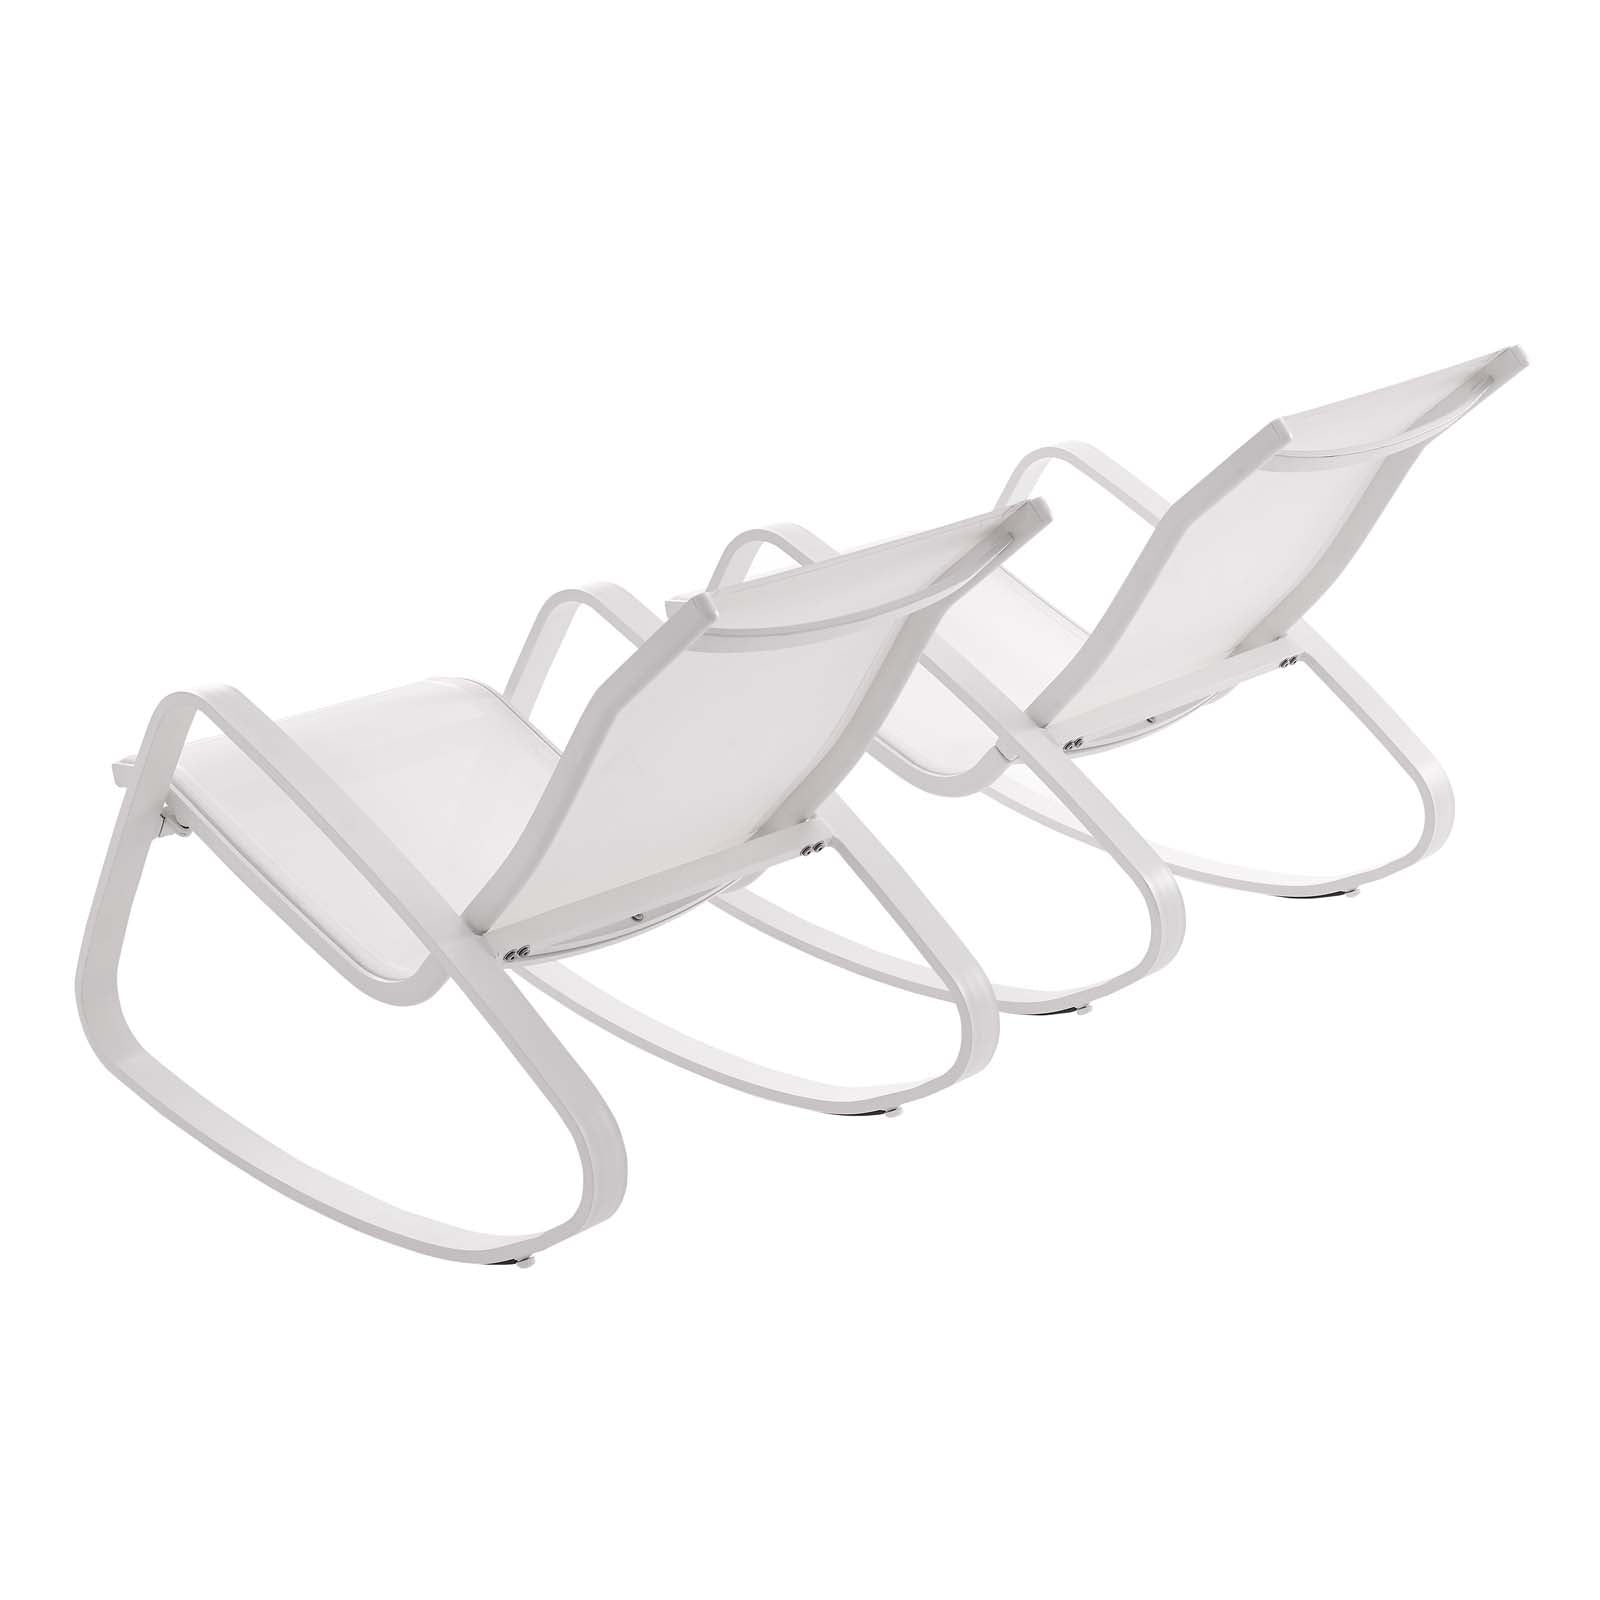 Modway Outdoor Chairs - Traveler Rocking Lounge Chair Outdoor Patio Mesh Sling Set of 2 White White